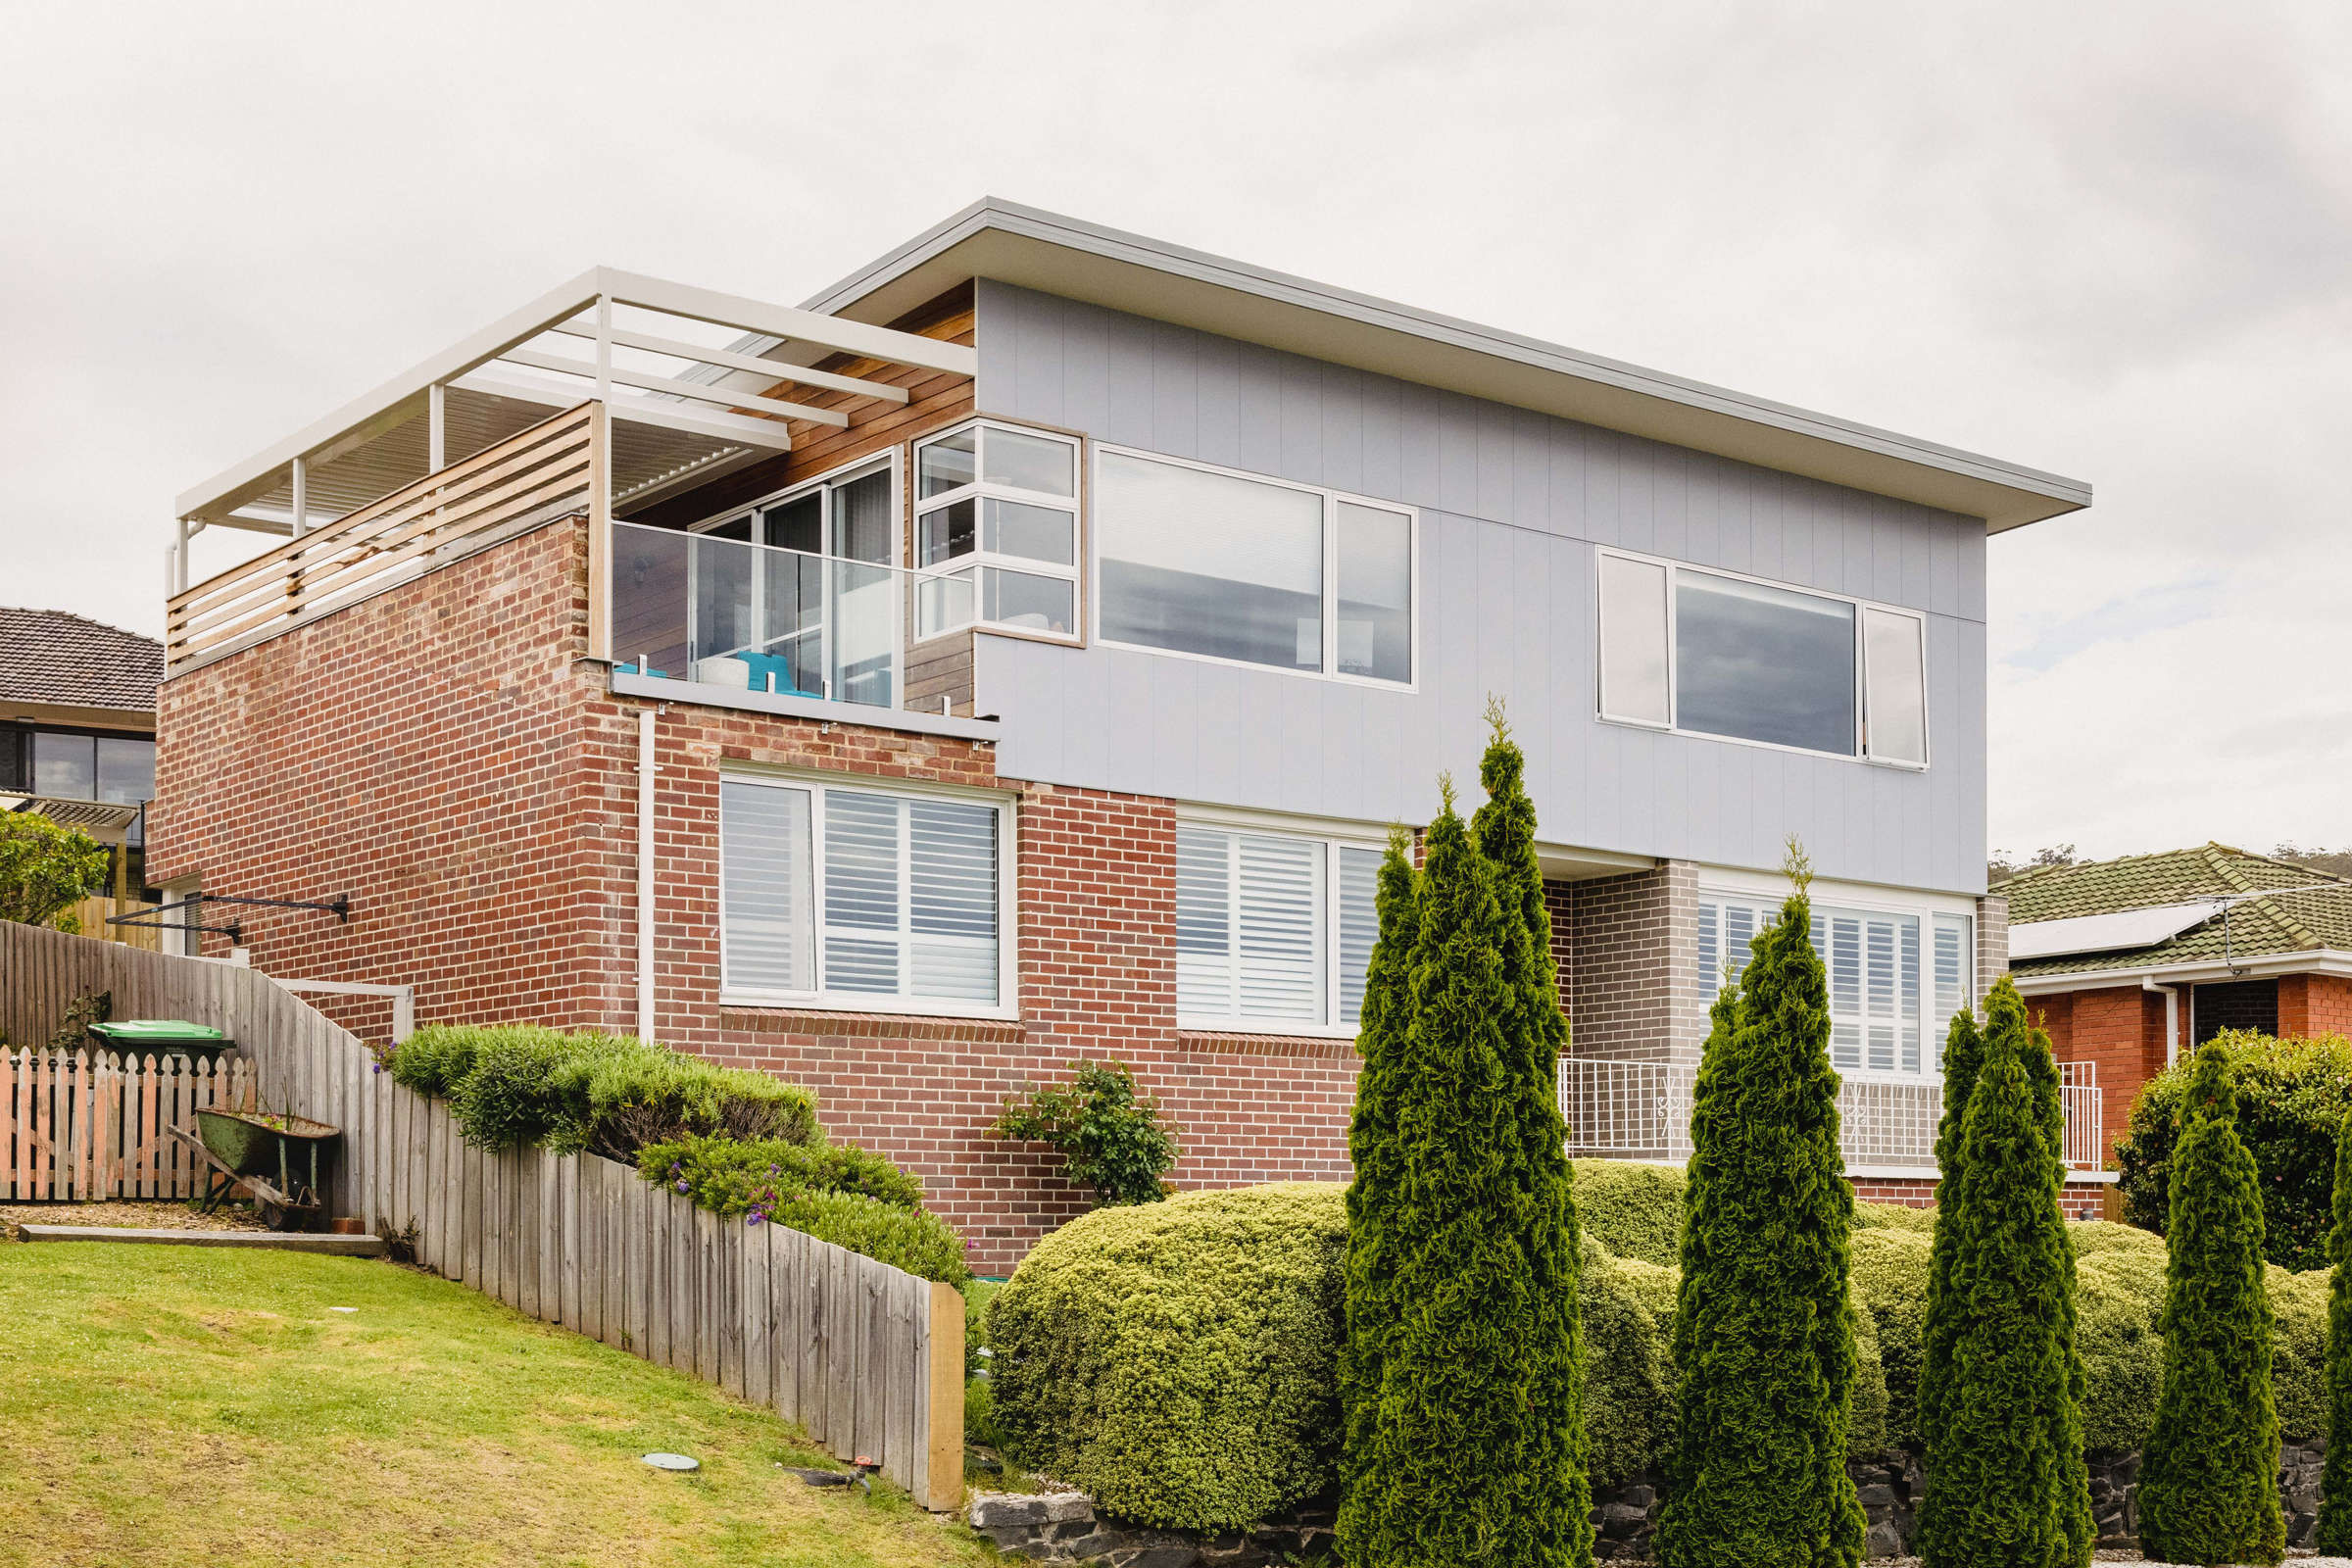 This Howrah home renovation added a second storey to a double brick 1960s house as a lifestyle renovation. It features steel framework over an external deck, motorised louvre system, sauna, ensuite bathroom, glass balustrade and a beautiful view. Photo: Jordan Davis.